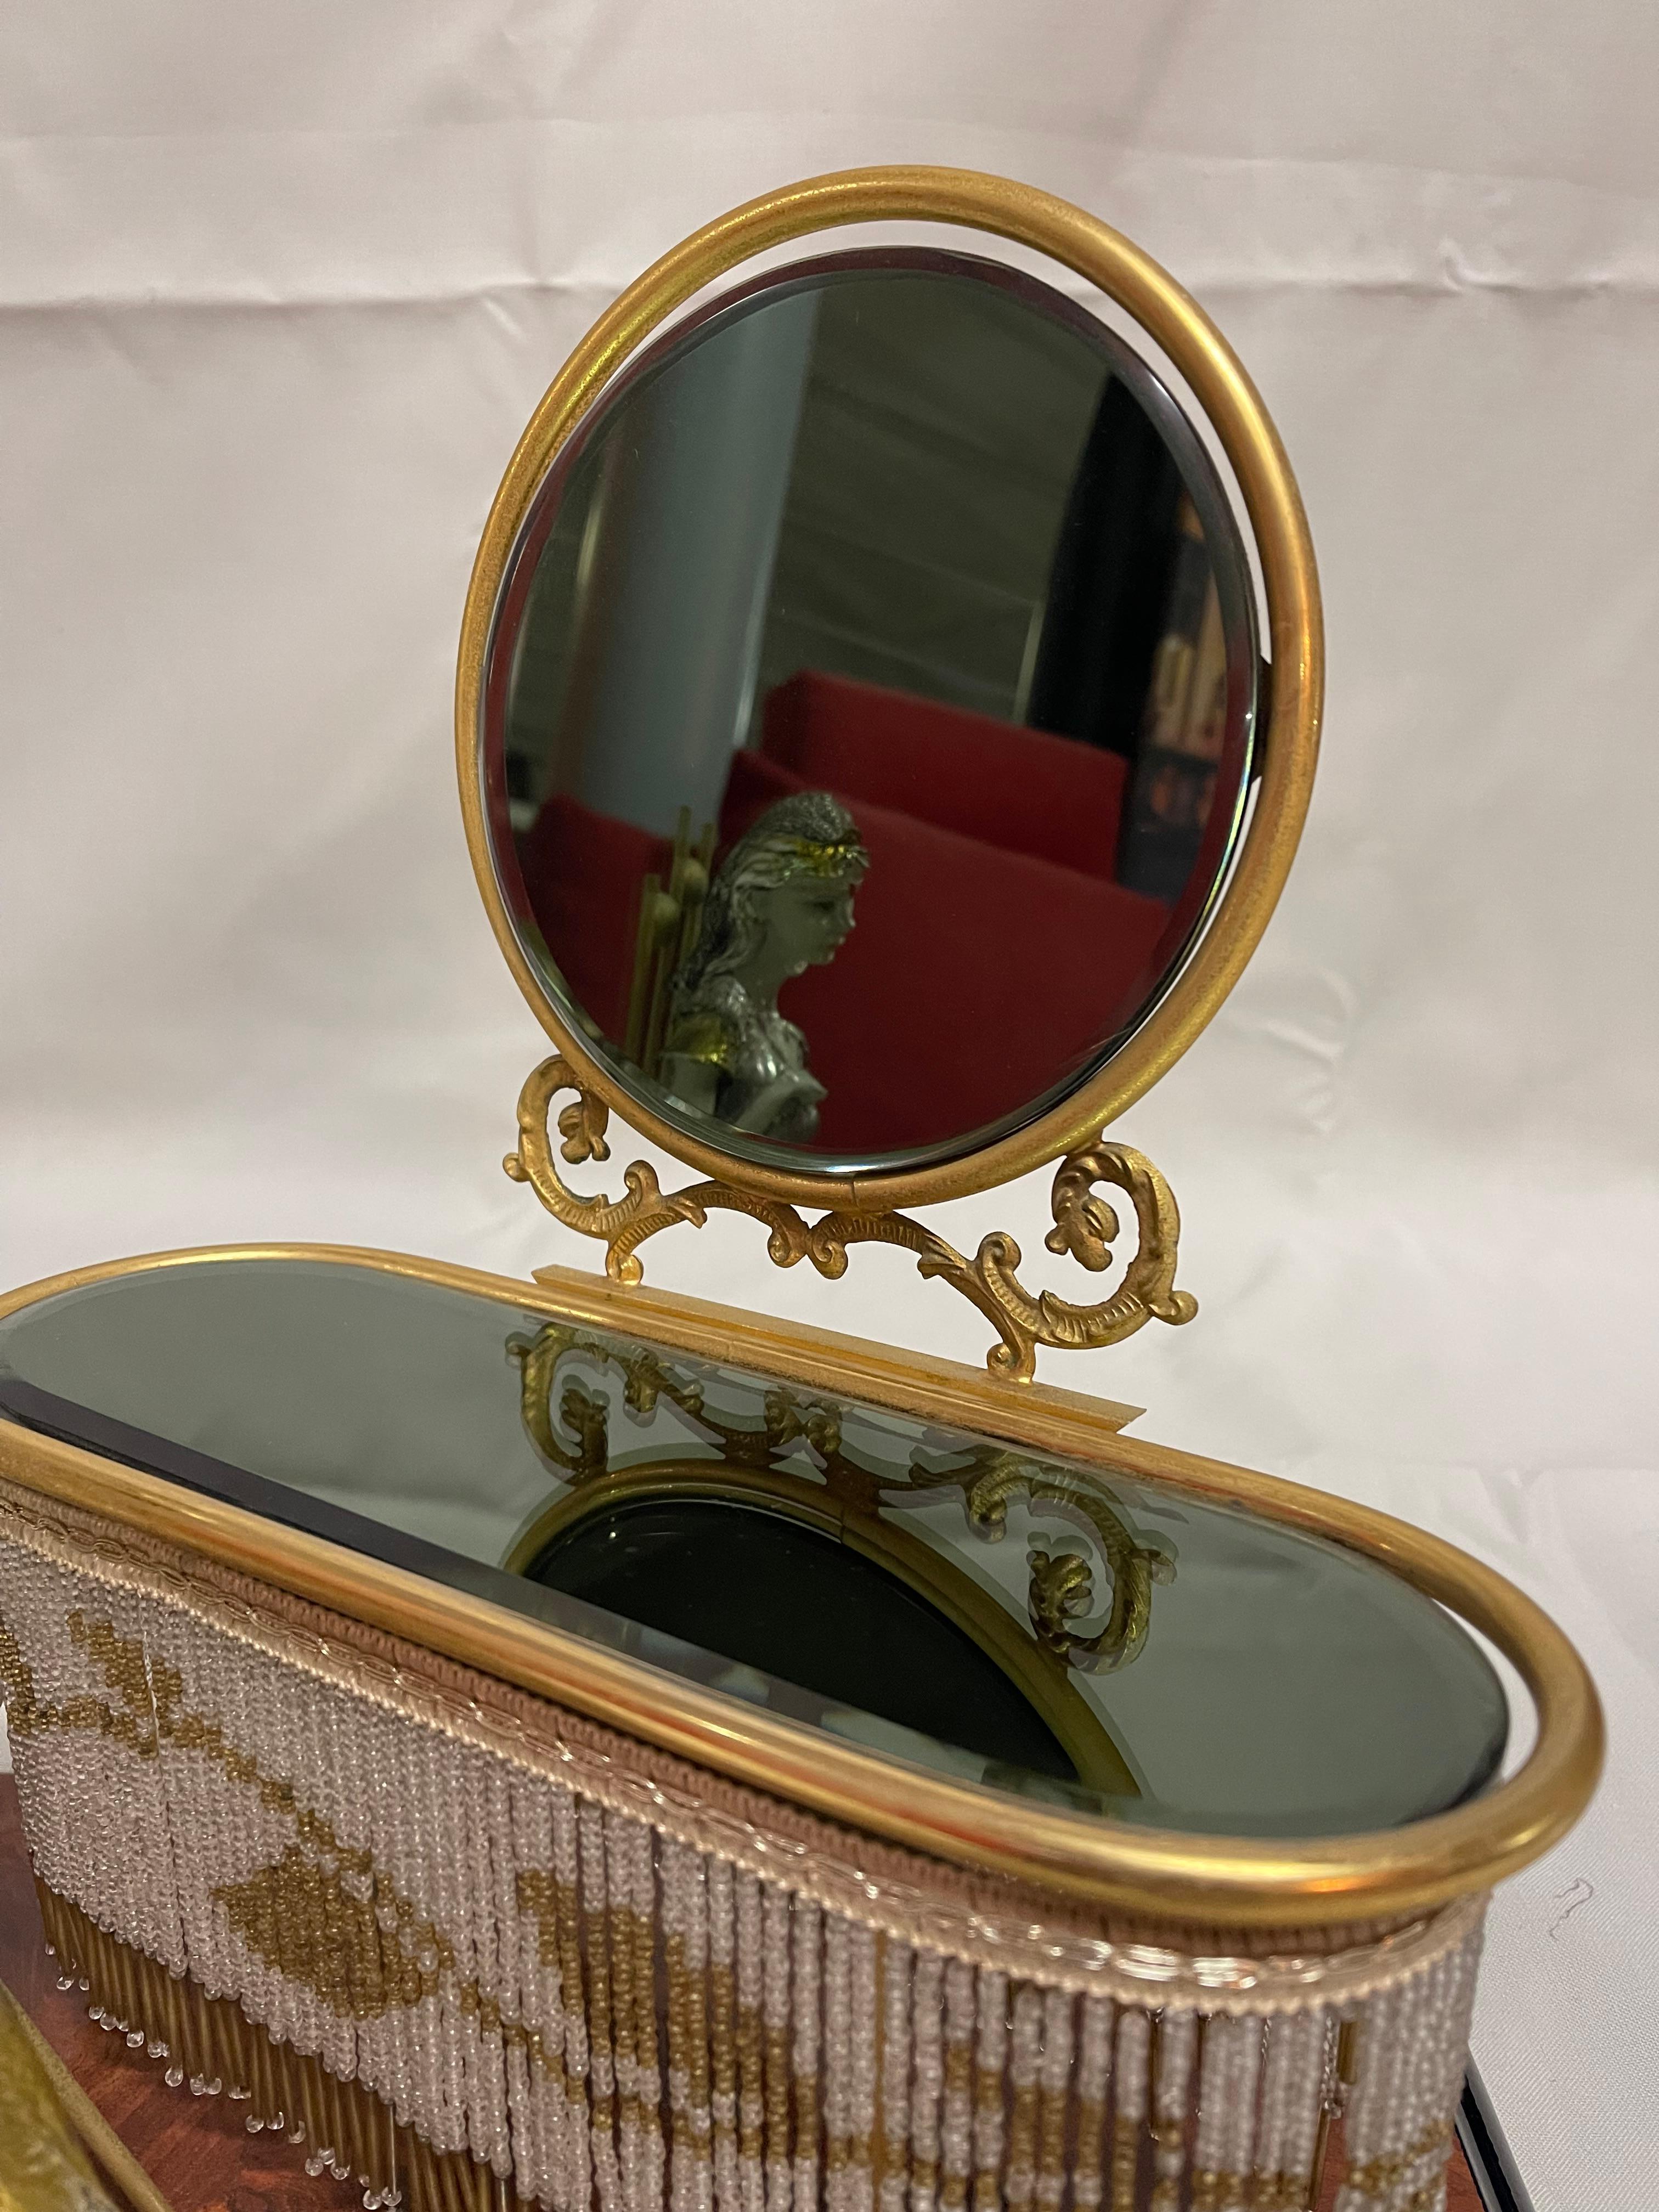 Other Beautiful Vintage Women's Objects with Mirrors For Sale